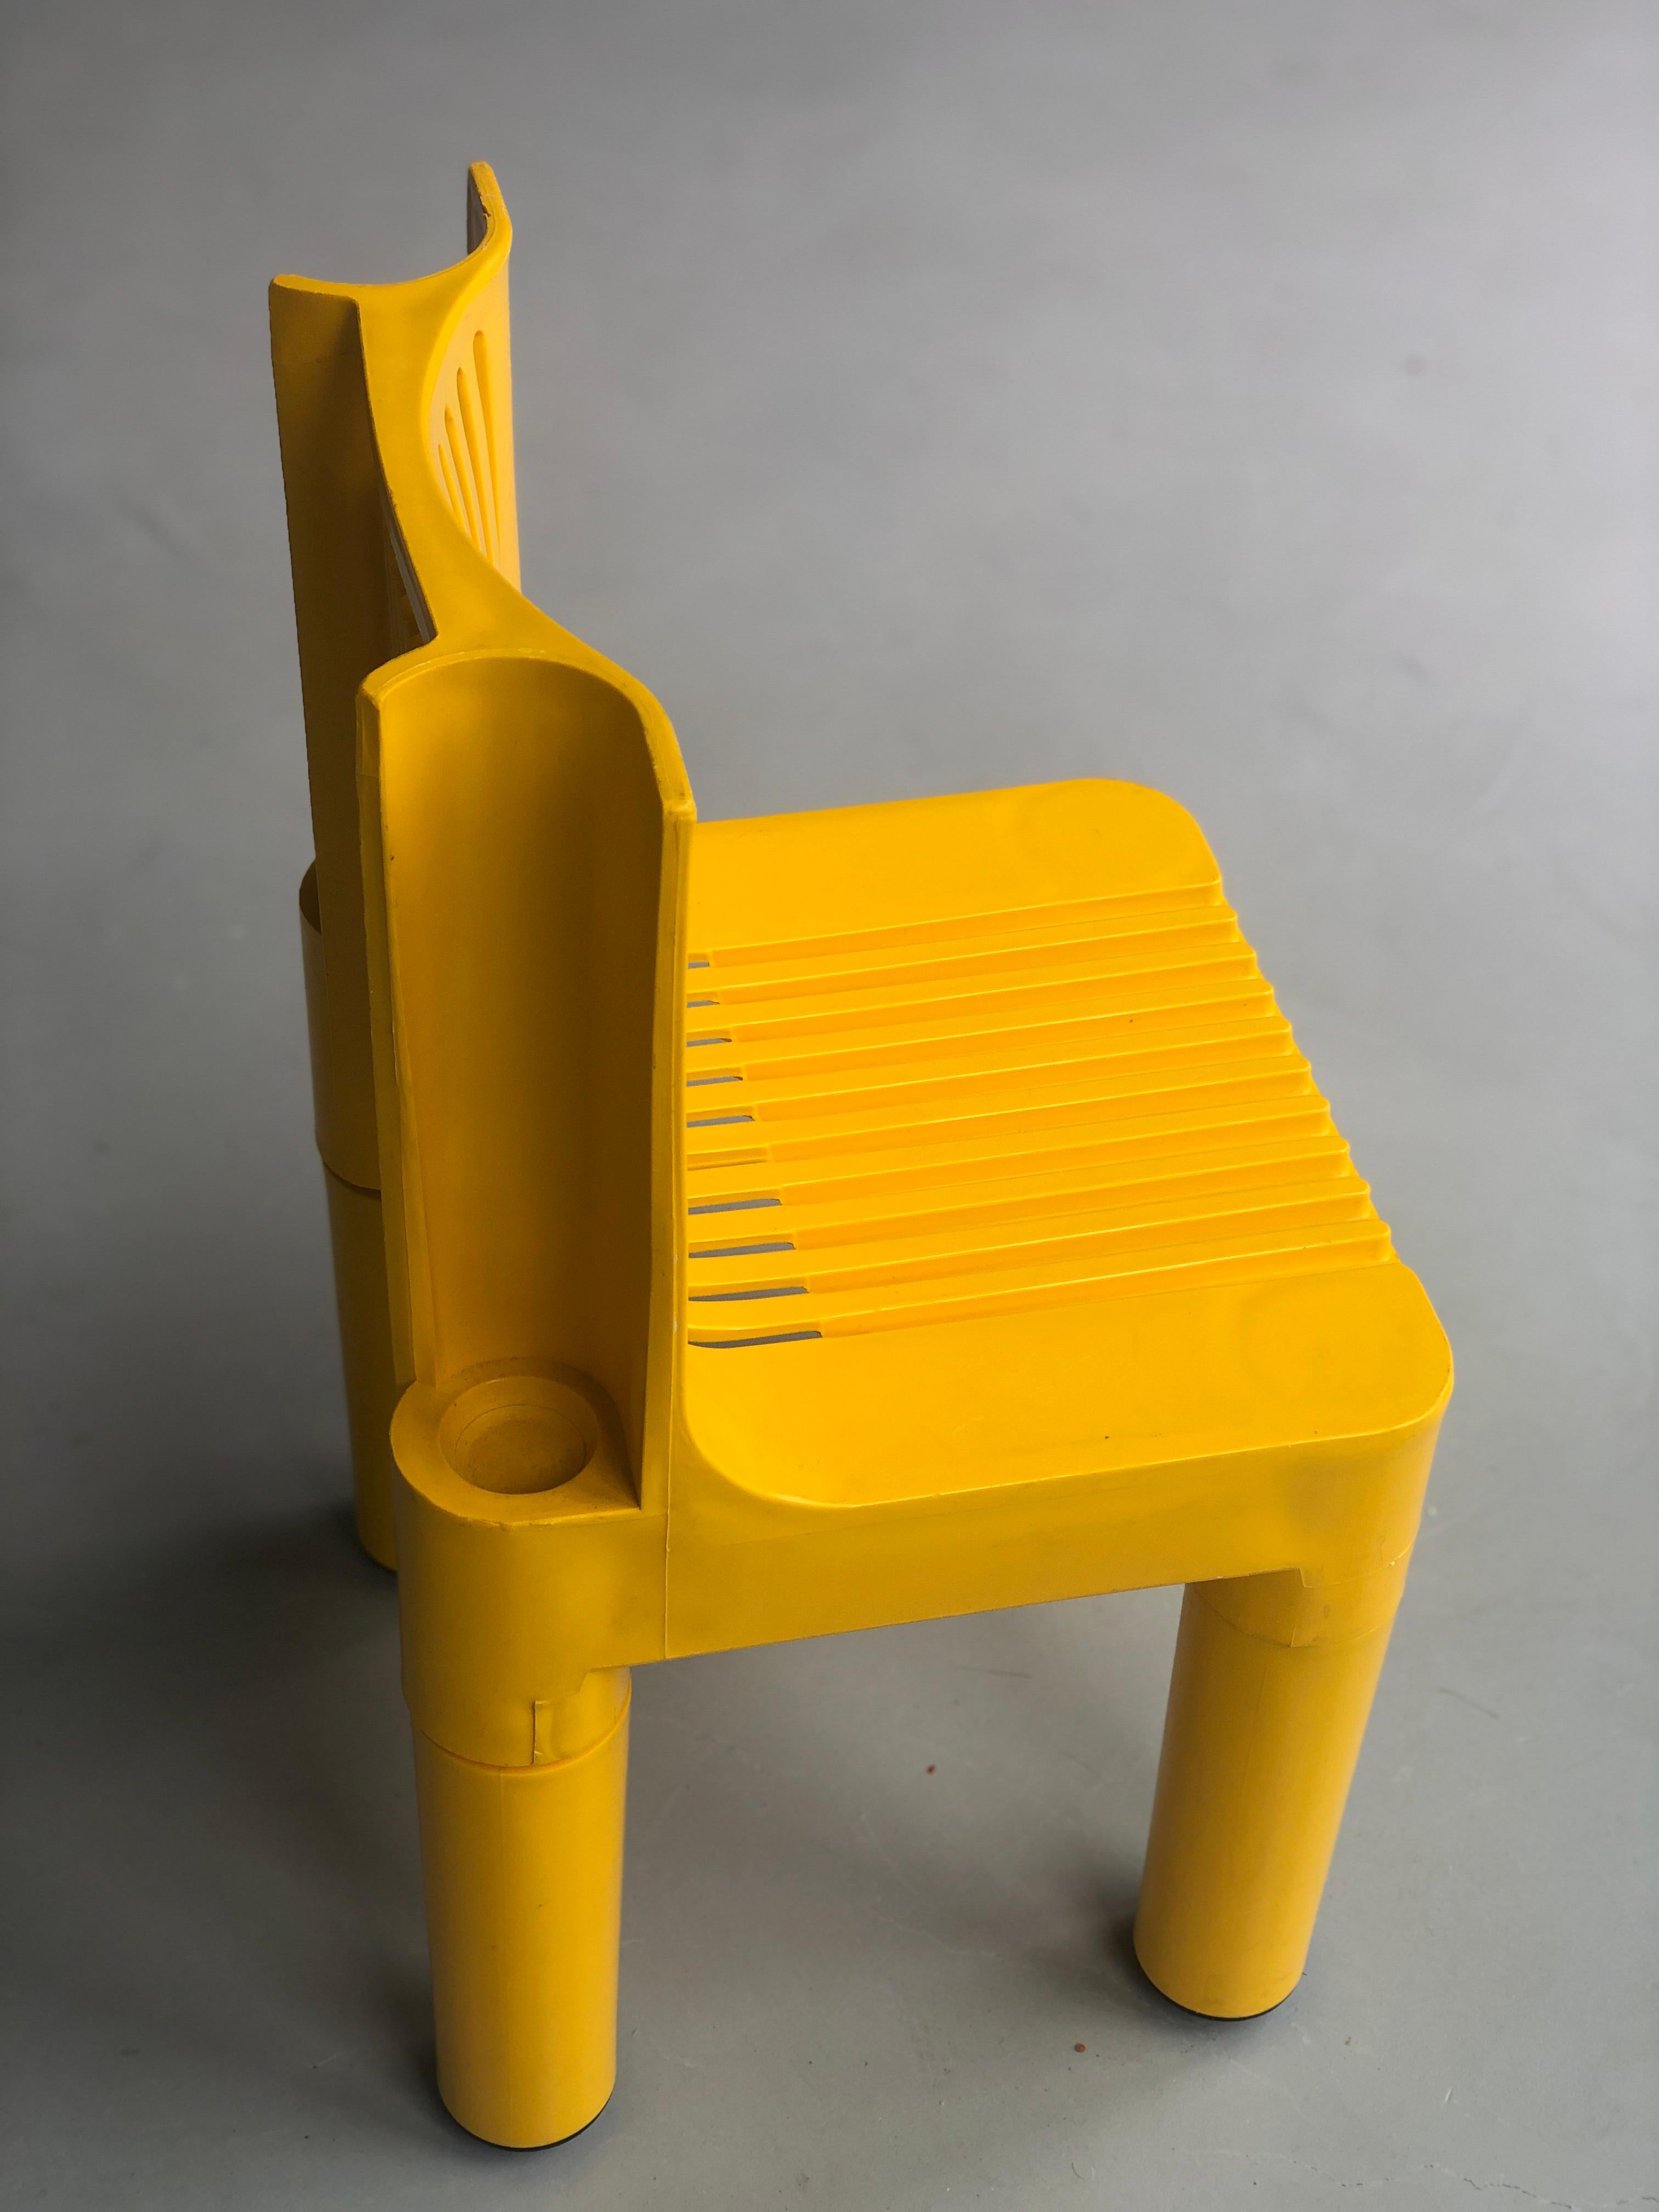 
Polyethylene children chair K 1340 Kartell - Marco Zanuso & Richard Sapper 1964
A stackable children’s chair, the K 1340 was the first chair entirely built of injection moulded plastic.
Later this model Chair was called 4999/5 Kartell

Chair is in